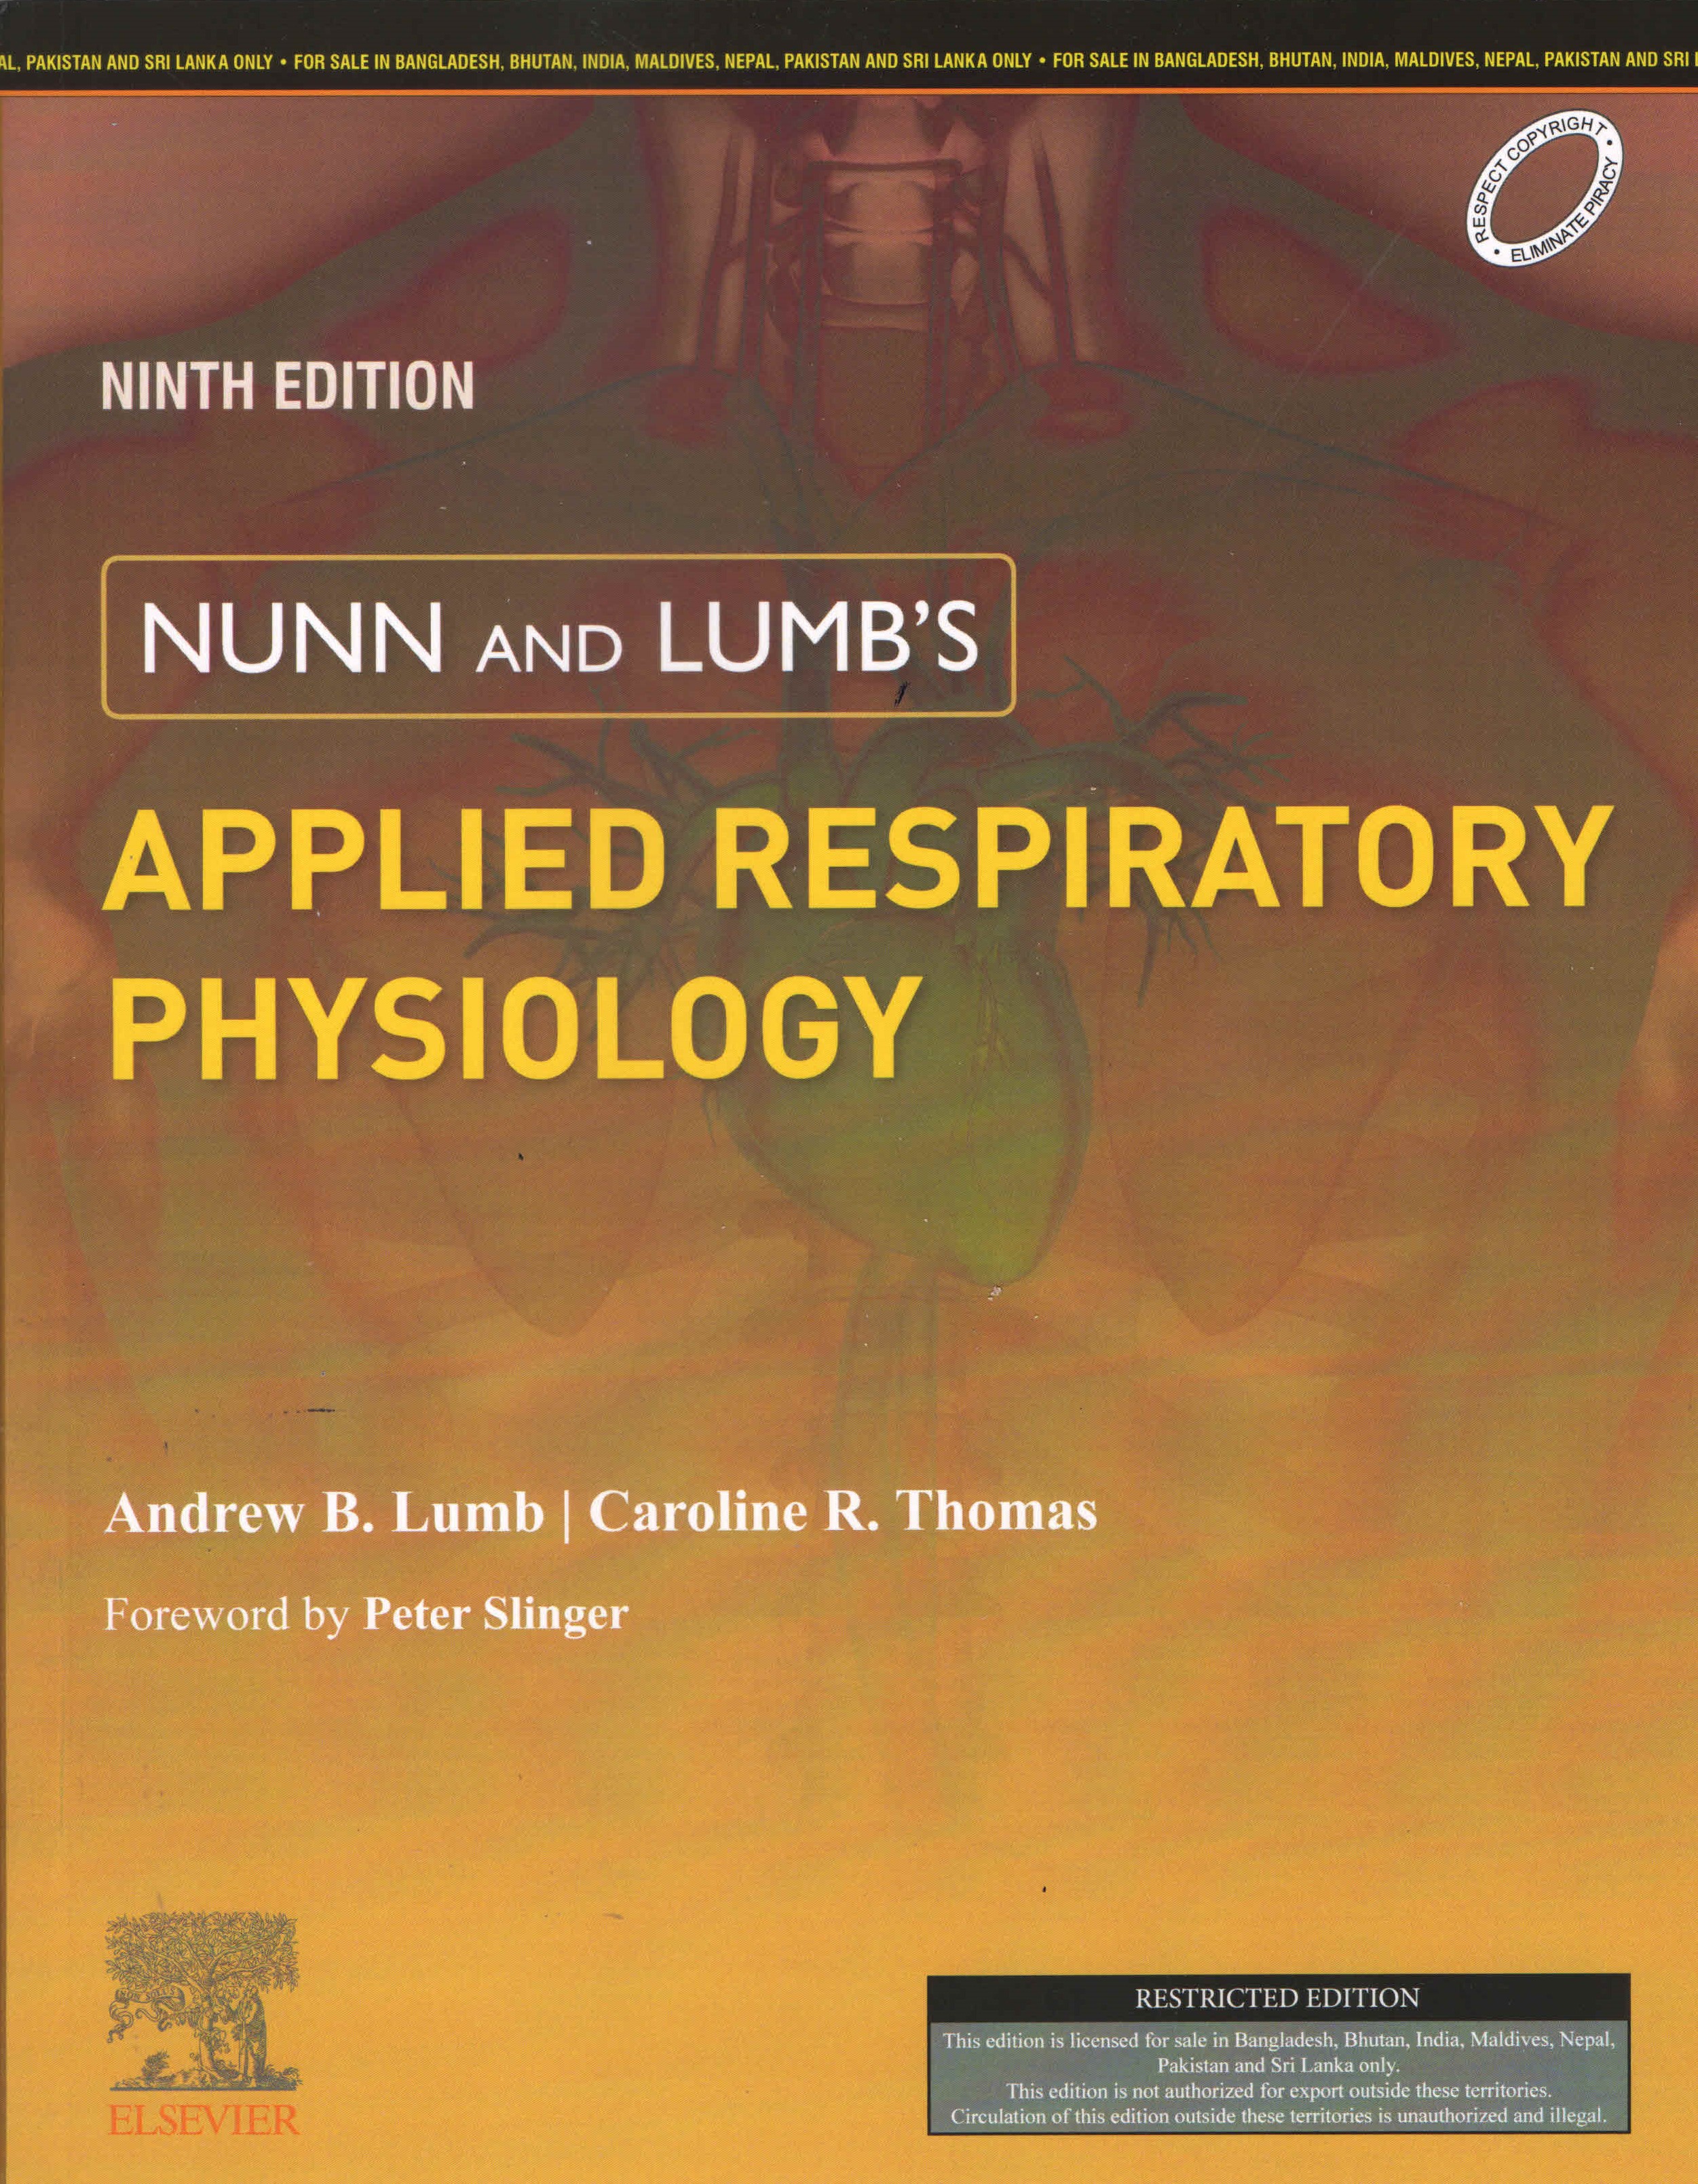 basic-sciences/physiology/nunn-and-lumb-s-applied-respiratory-physiology-9ed-9788131264607